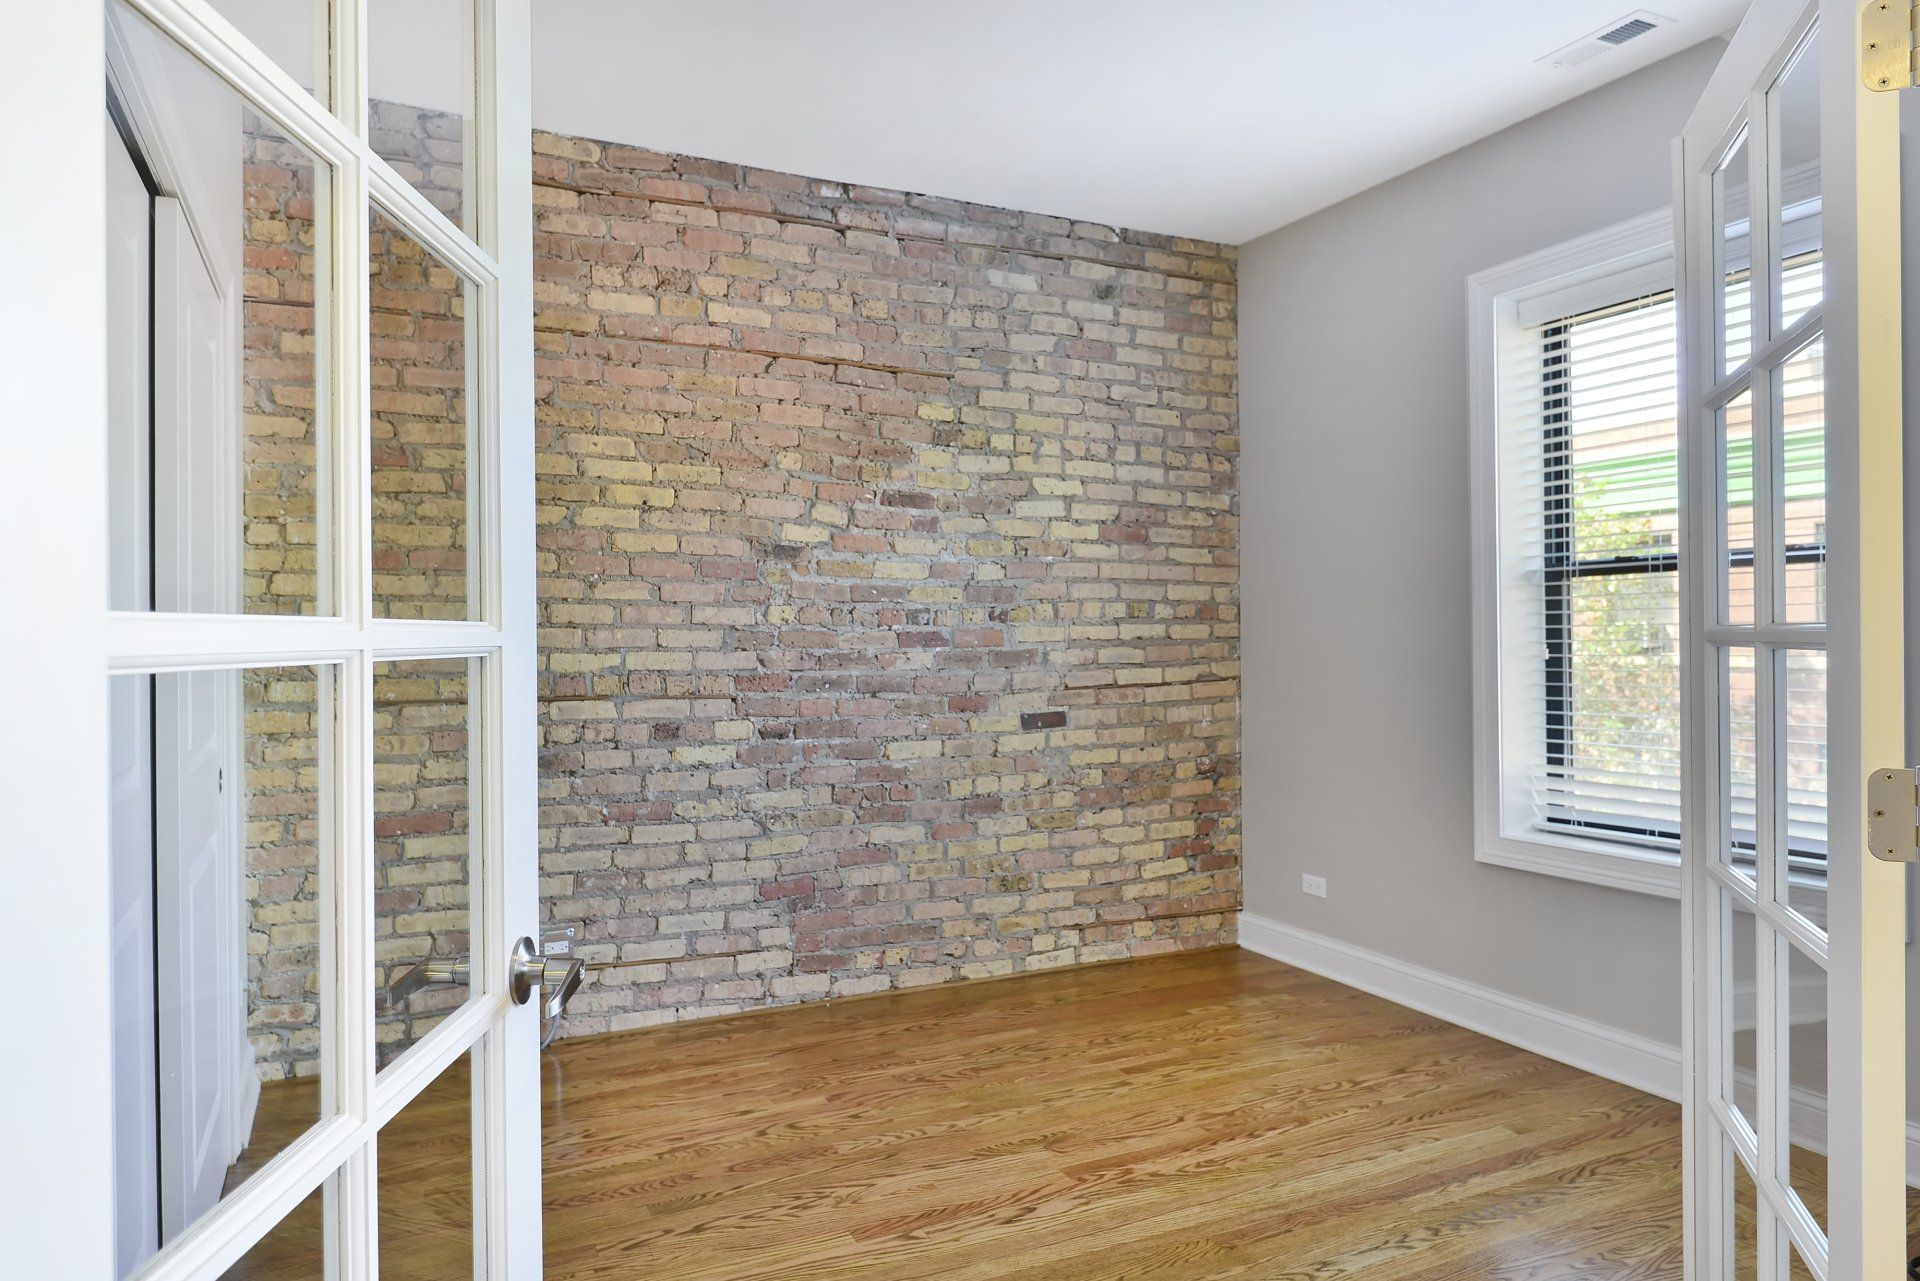 An empty room with a brick wall and hardwood floors.